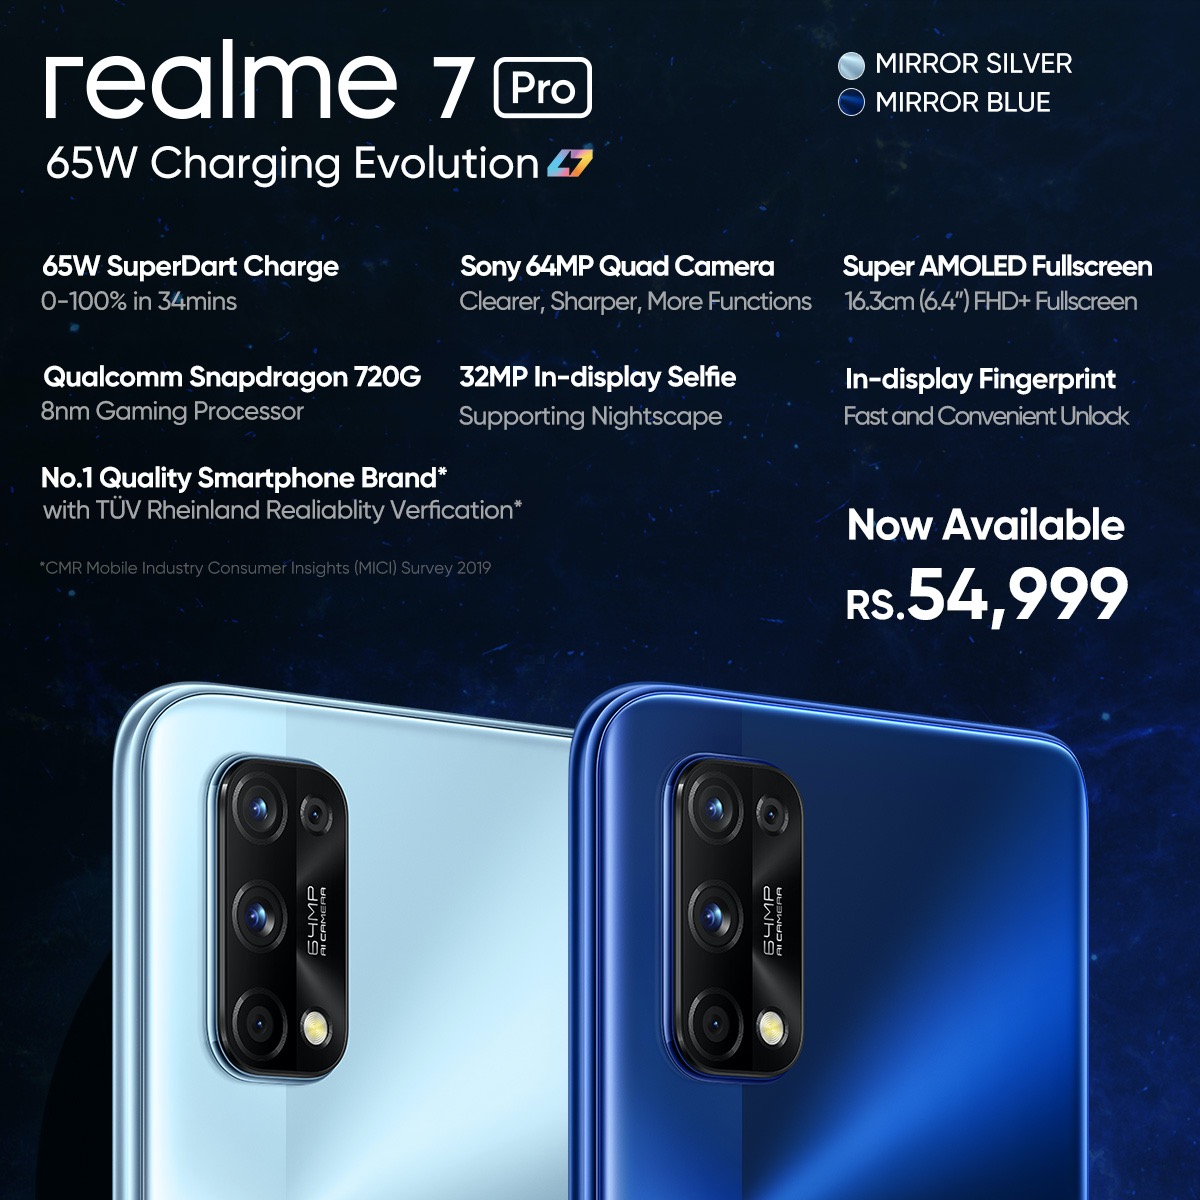 realme 7 pro marks sales records in pakistan; now available in offline markets nationwide